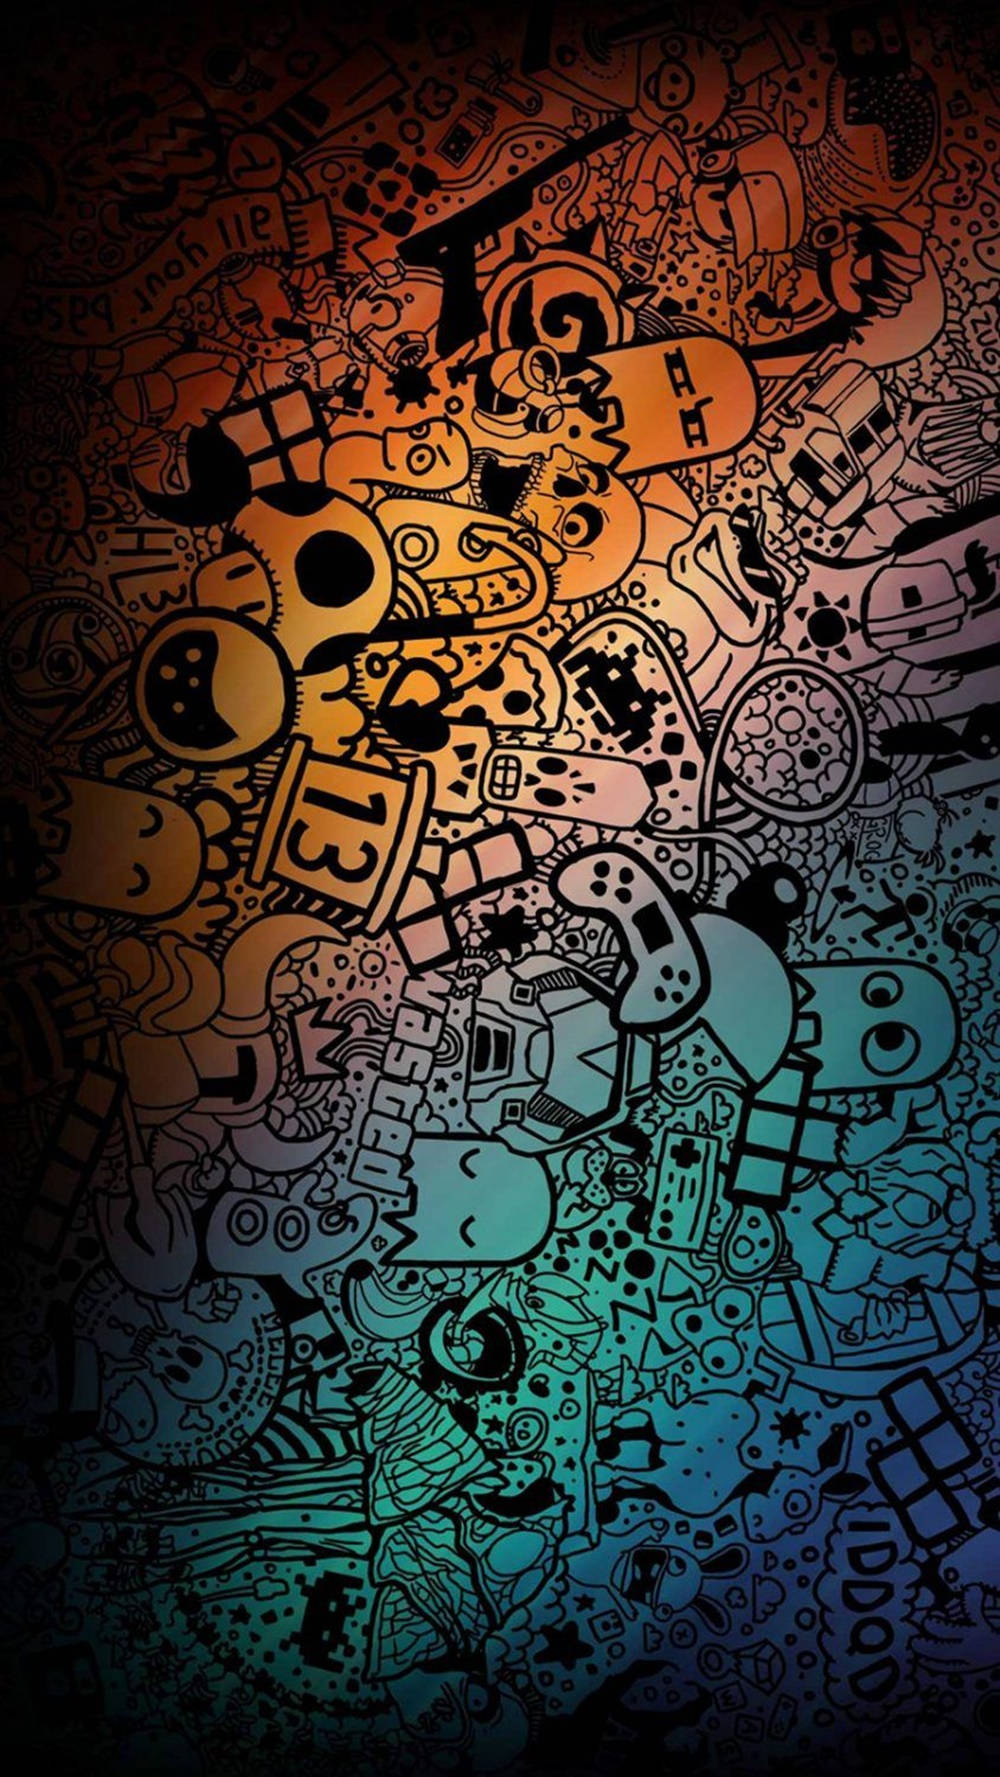 Free Doodle Wallpaper Downloads, [200+] Doodle Wallpapers for FREE |  